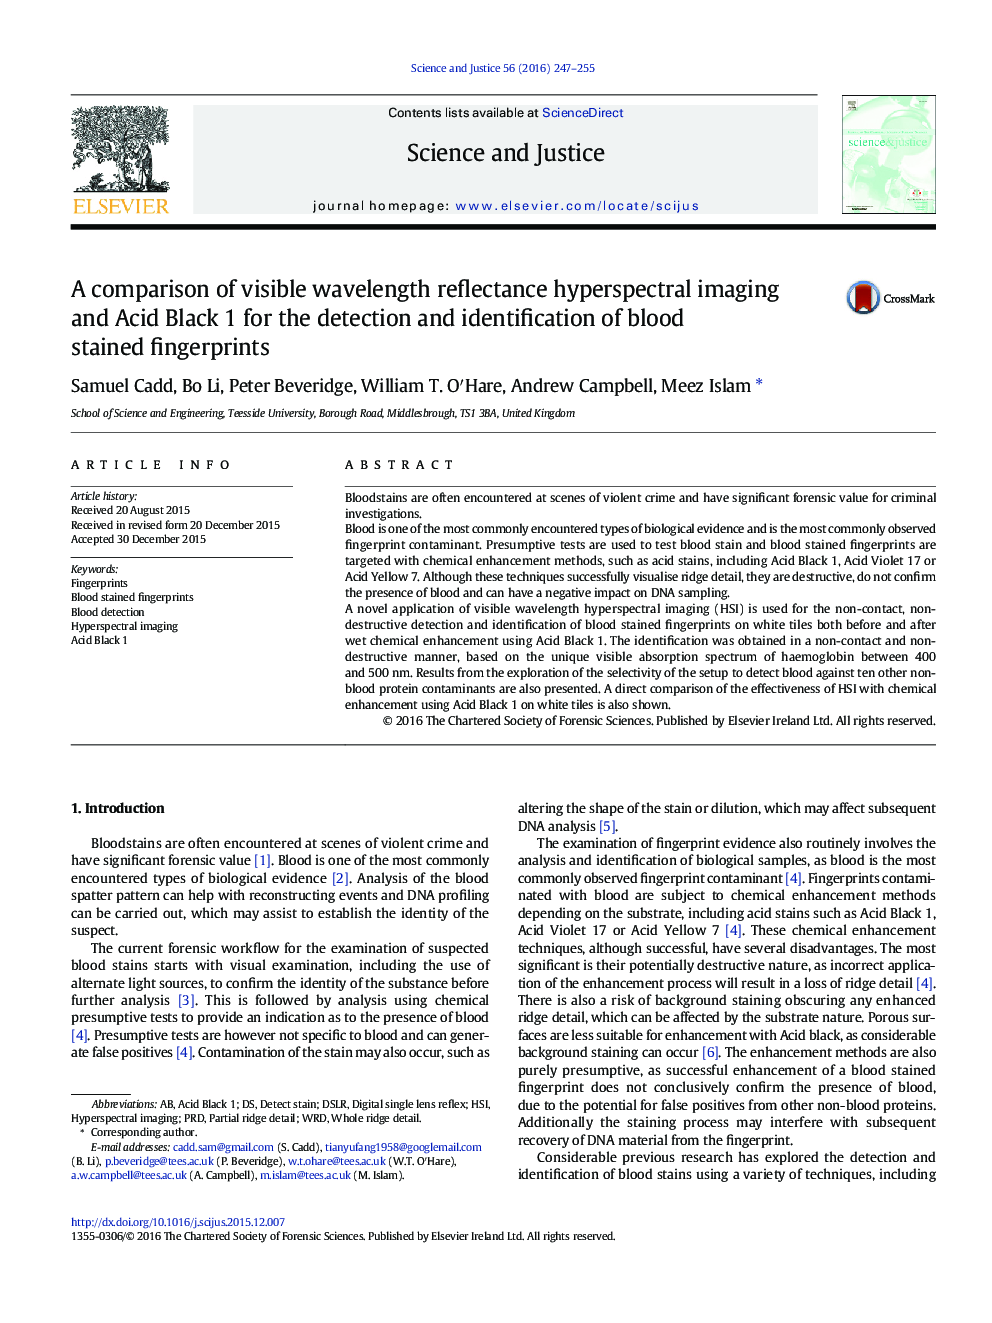 A comparison of visible wavelength reflectance hyperspectral imaging and Acid Black 1 for the detection and identification of blood stained fingerprints